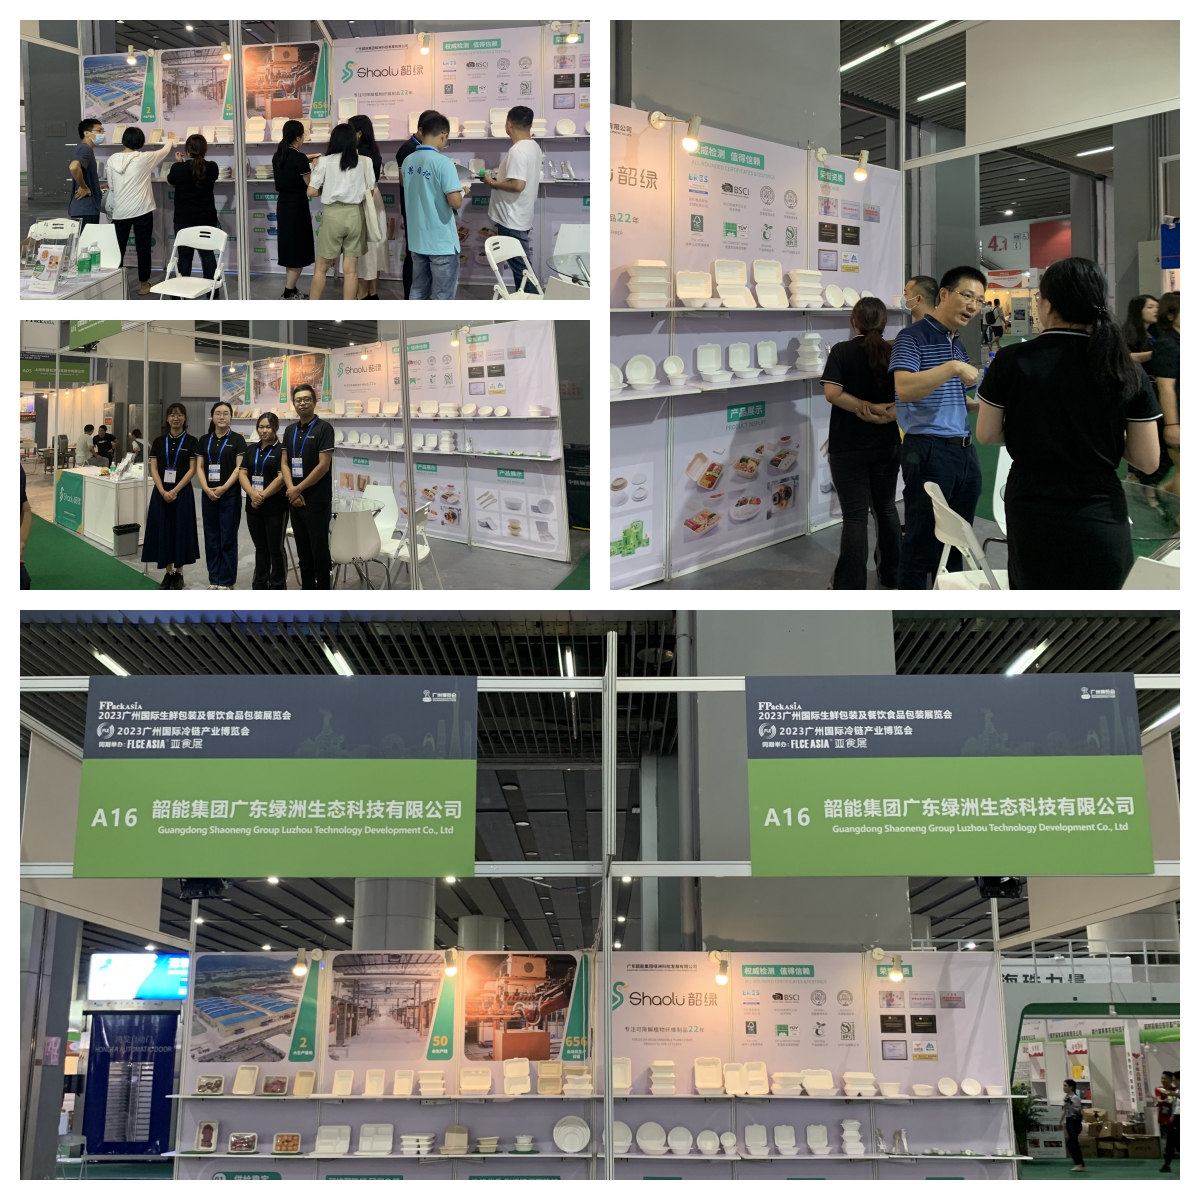 Luzhou Pack's exhibition displaying food eco friendly pakaging supplies